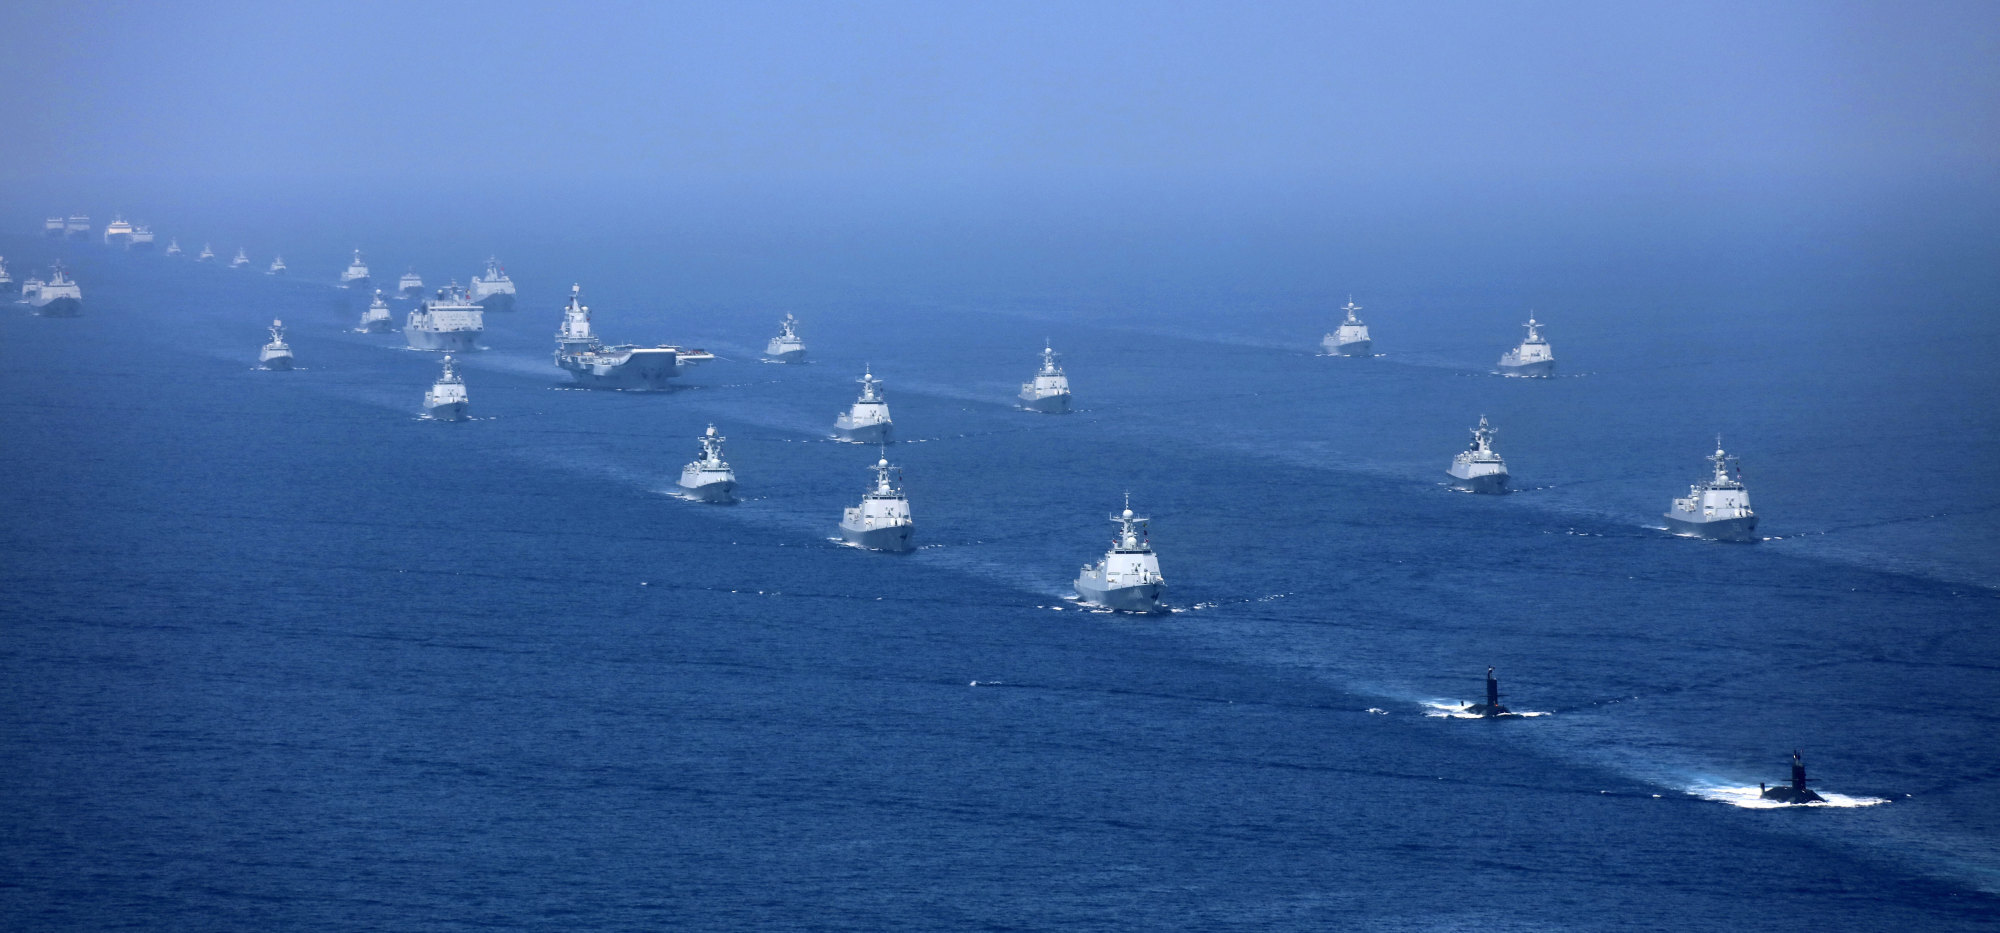 China’s Liaoning aircraft carrier is accompanied by navy frigates and submarines conducting an exercises in the South China Sea. Photo: Xinhua via AP